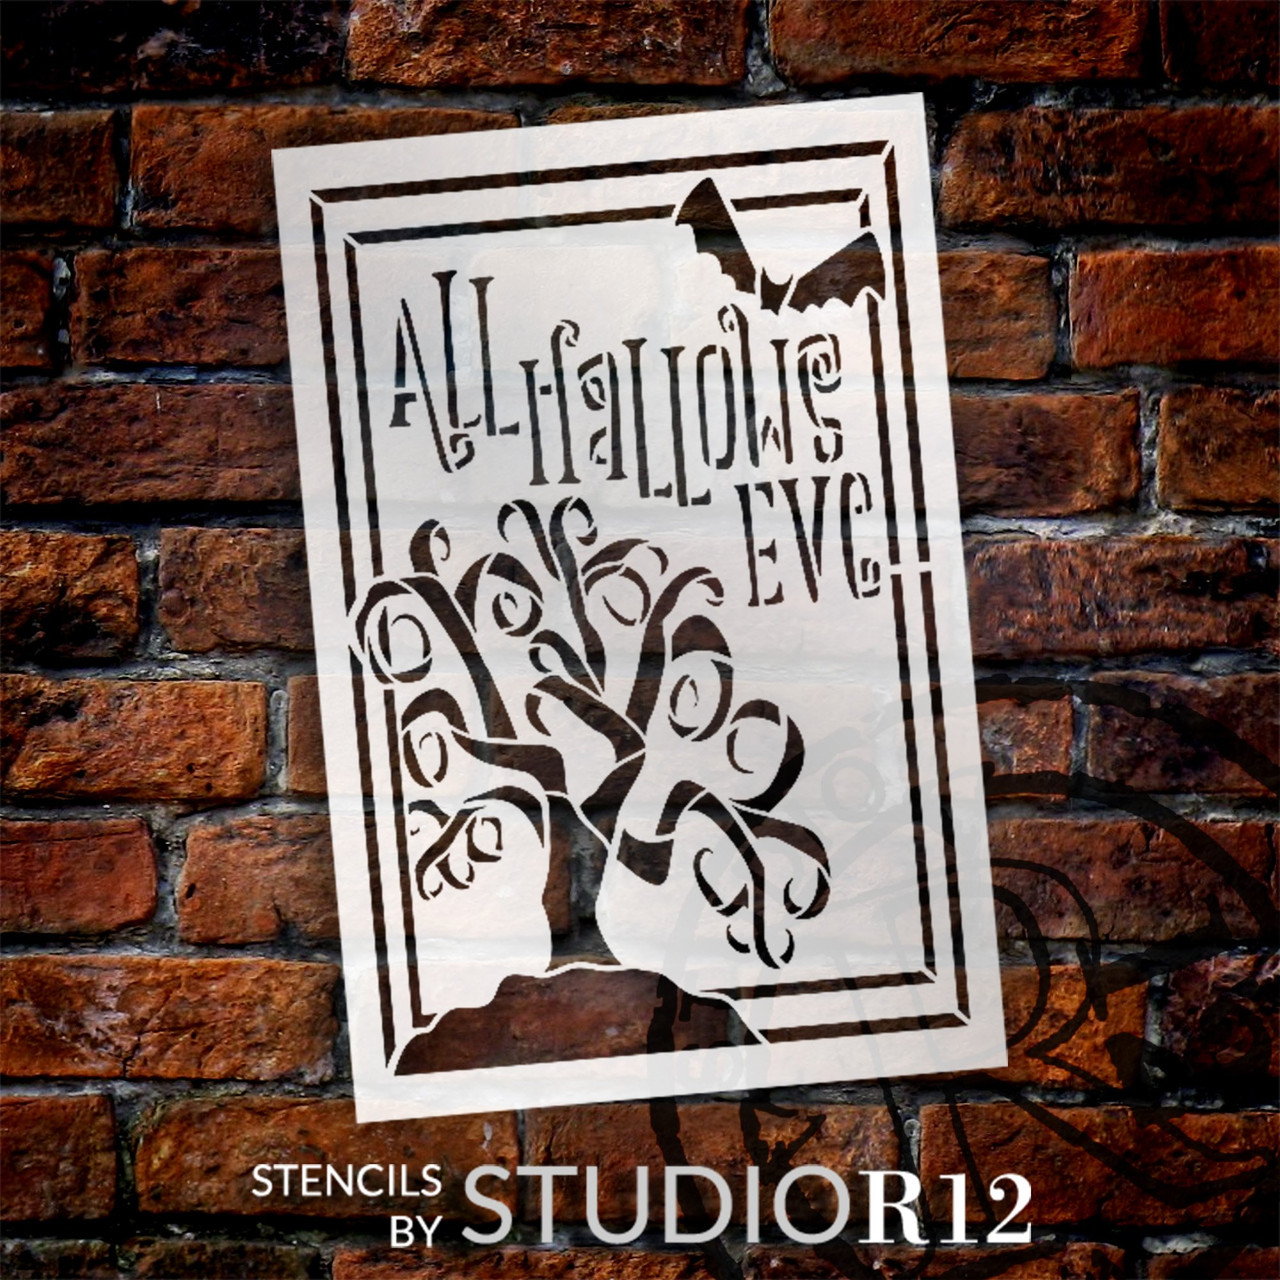 All Hallows Eve Spooky Bat and Tree Stencil by StudioR12 - Select Size - USA Made - Reusable | Craft DIY Halloween Home Decor | Paint Fall Wood Sign